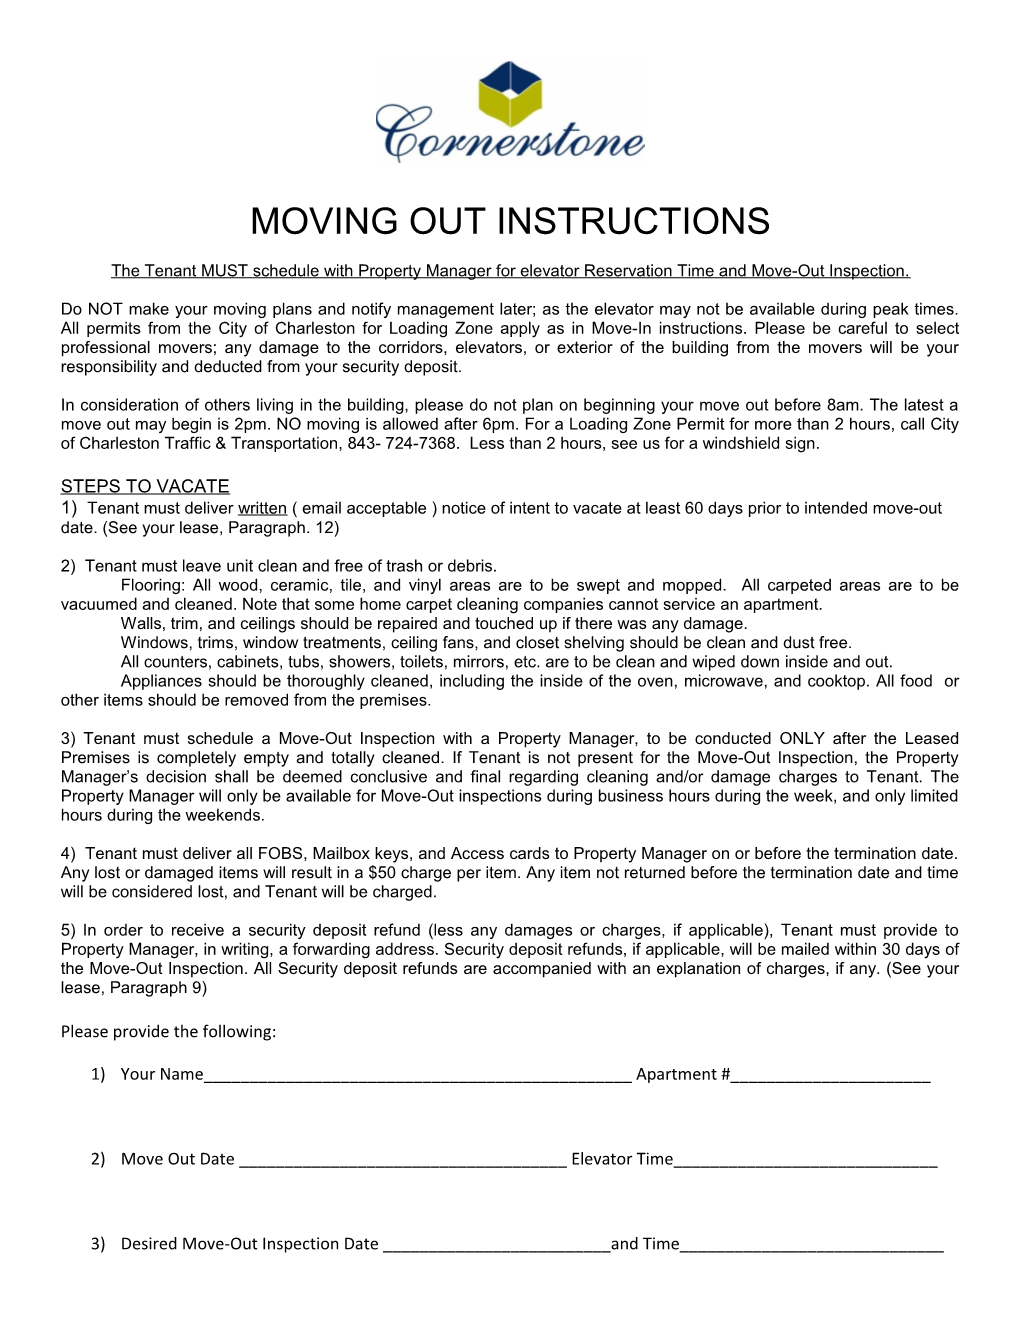 Moving out Instructions